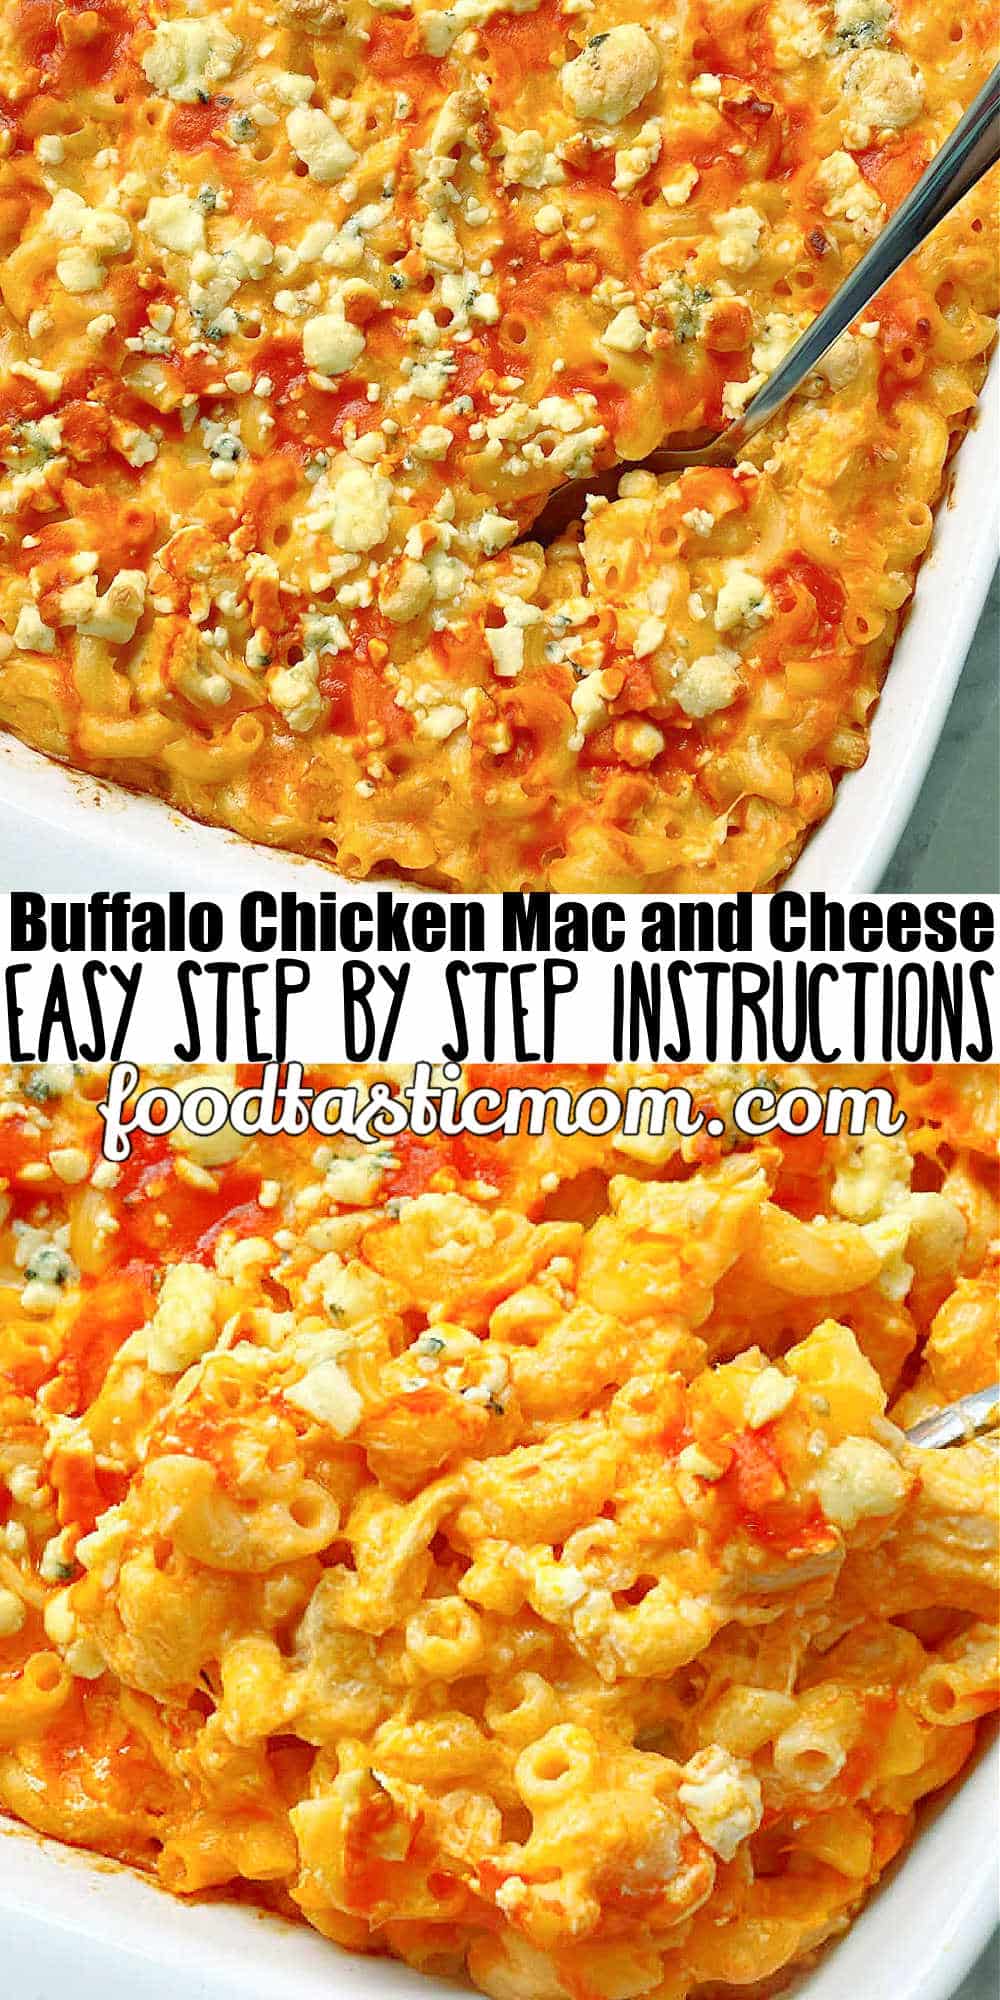 Here it is - the best, creamy, zesty, full of flavor recipe for Buffalo Chicken Mac and Cheese - perfect for entertaining and tailgating. via @foodtasticmom